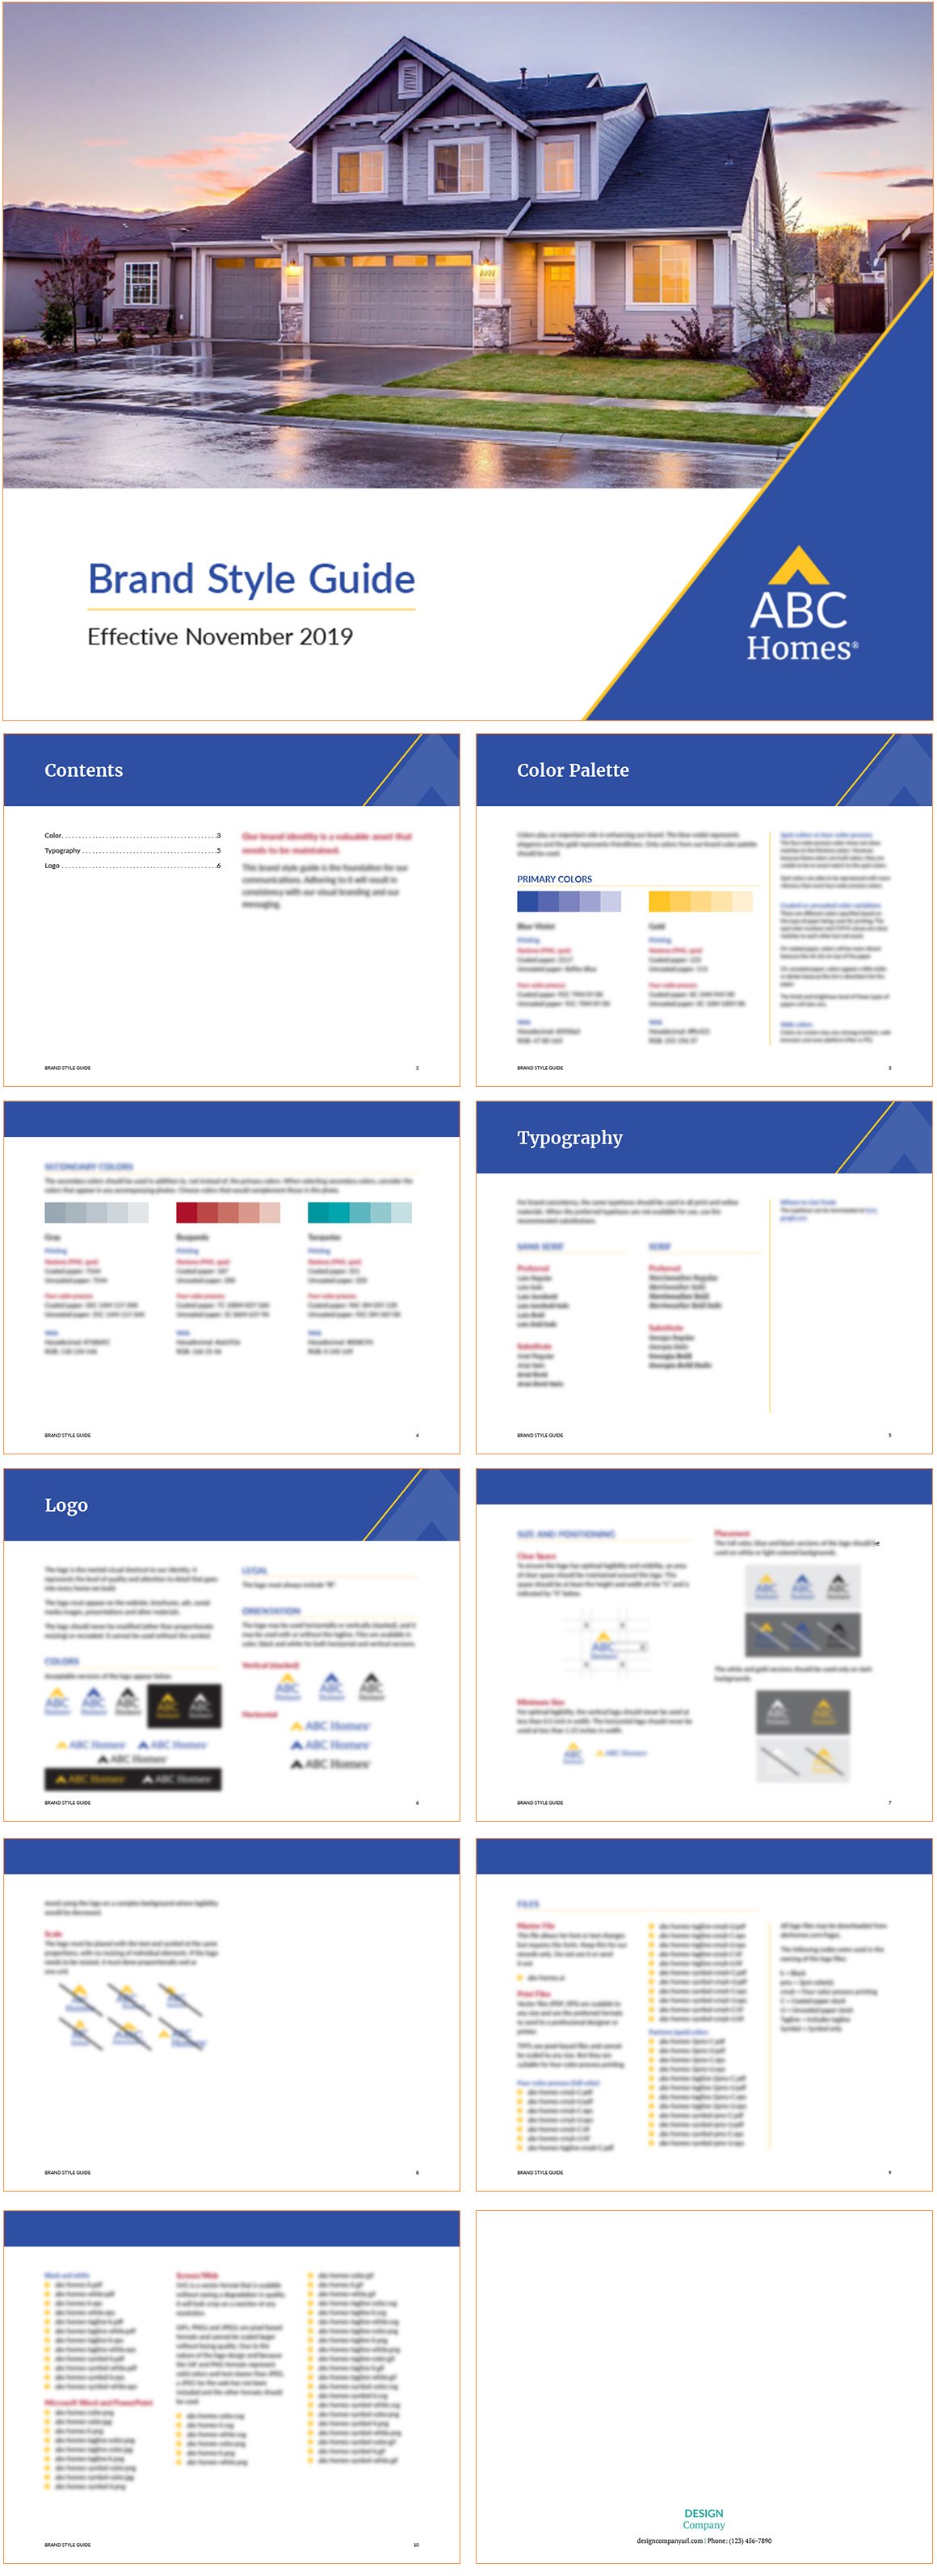 Brand Style Guide Template - Essentials Version